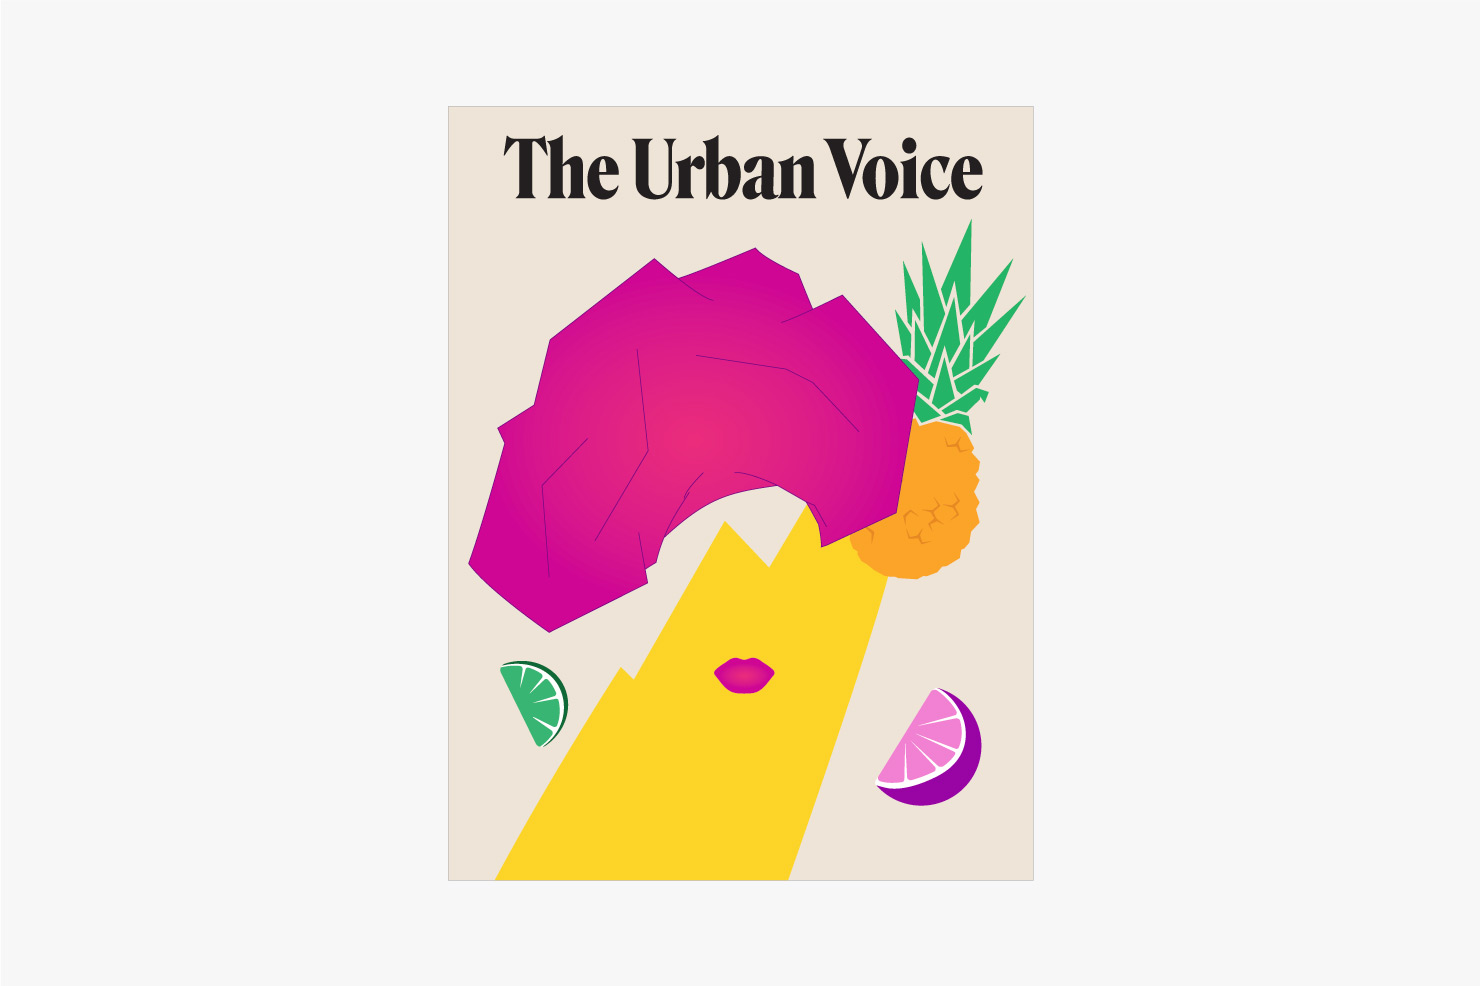 The Urban Voice printed cover design